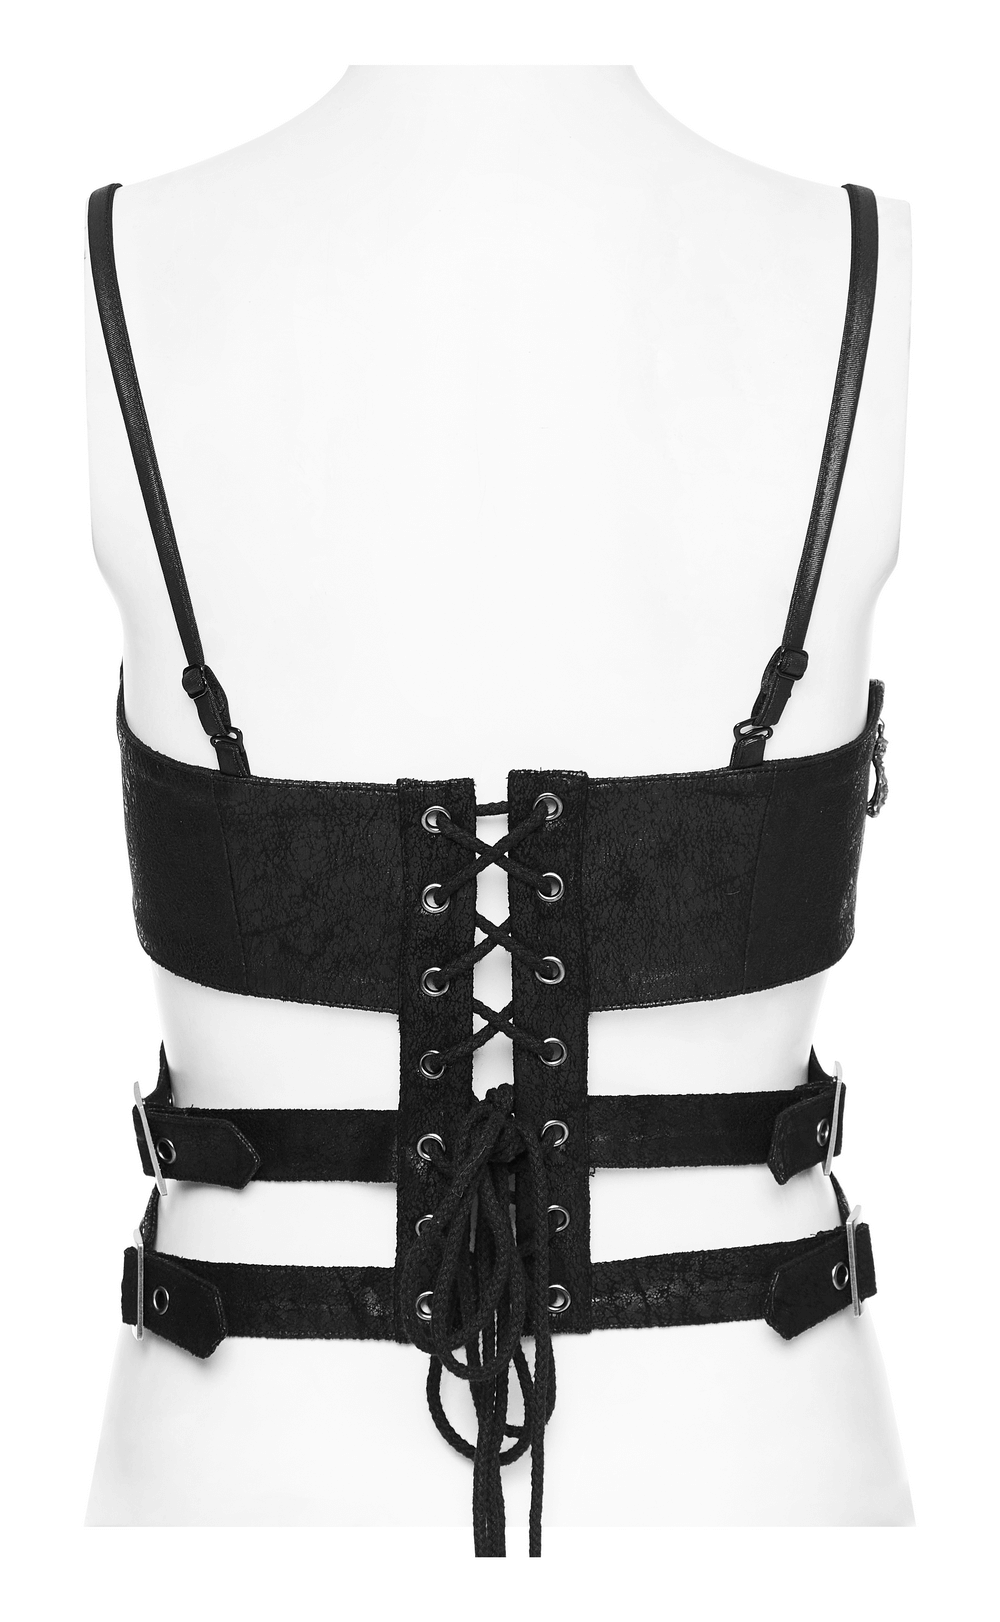 CLEARANCE of Faux Leather Lace Up Top With Eyelet and Zipper Details - EU